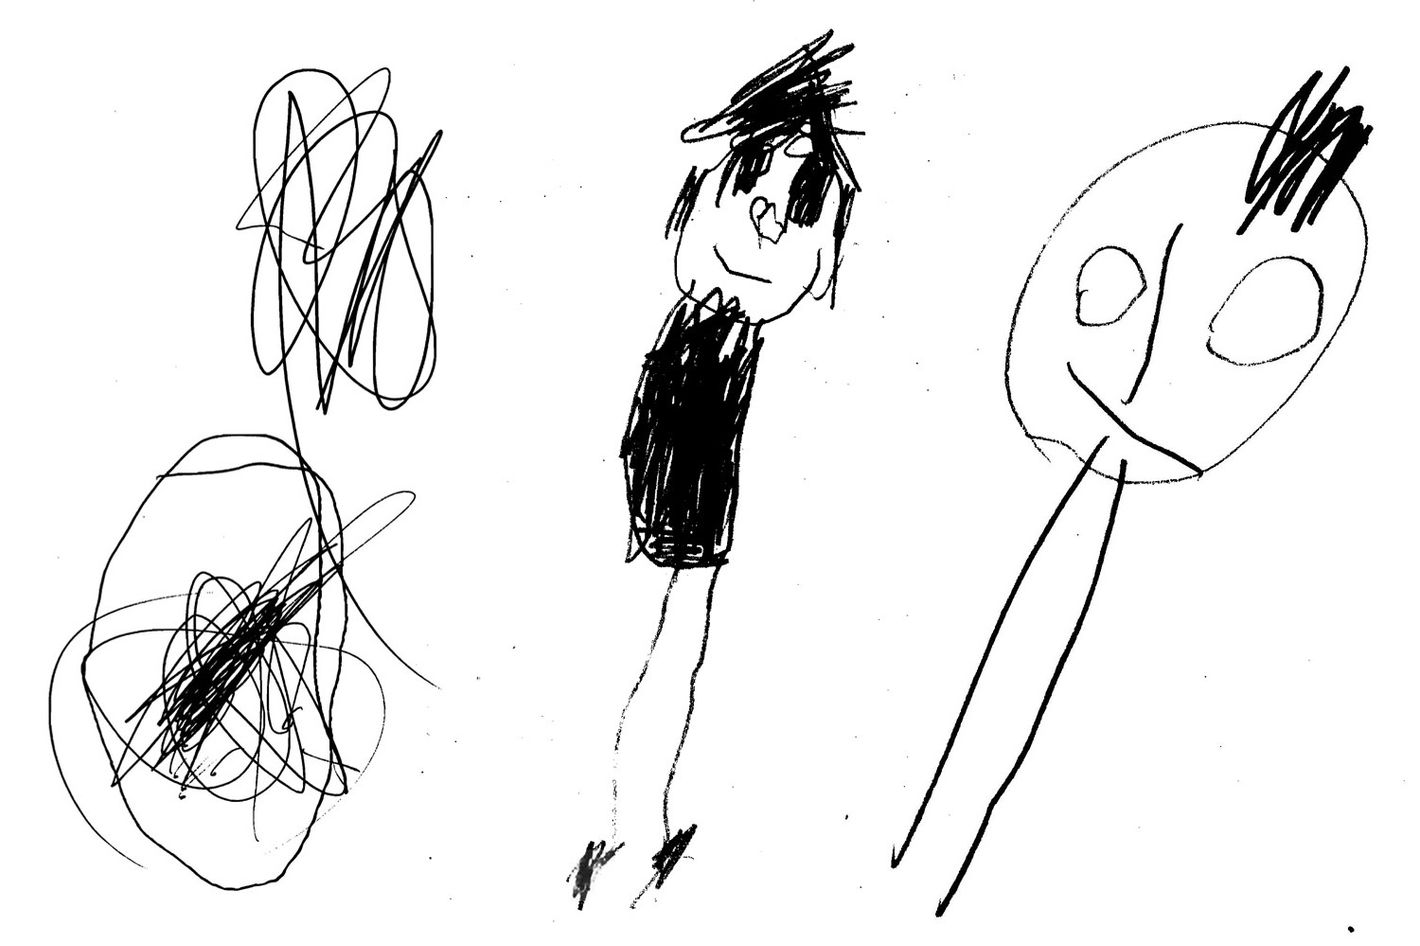 Are Smart Kids Better at Drawing?